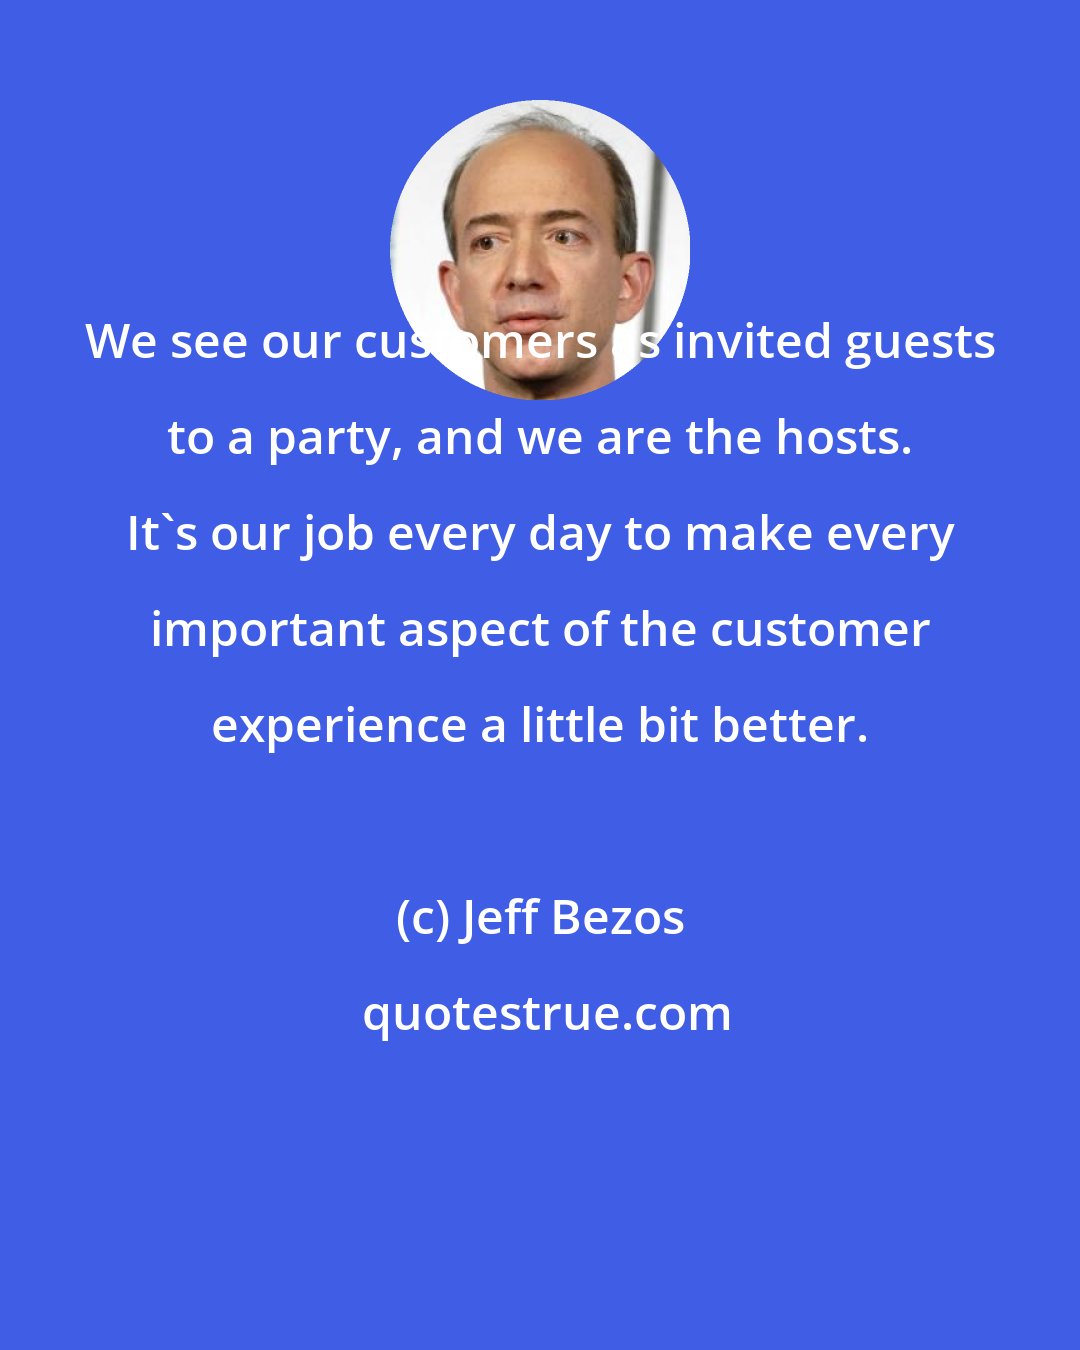 Jeff Bezos: We see our customers as invited guests to a party, and we are the hosts. It's our job every day to make every important aspect of the customer experience a little bit better.